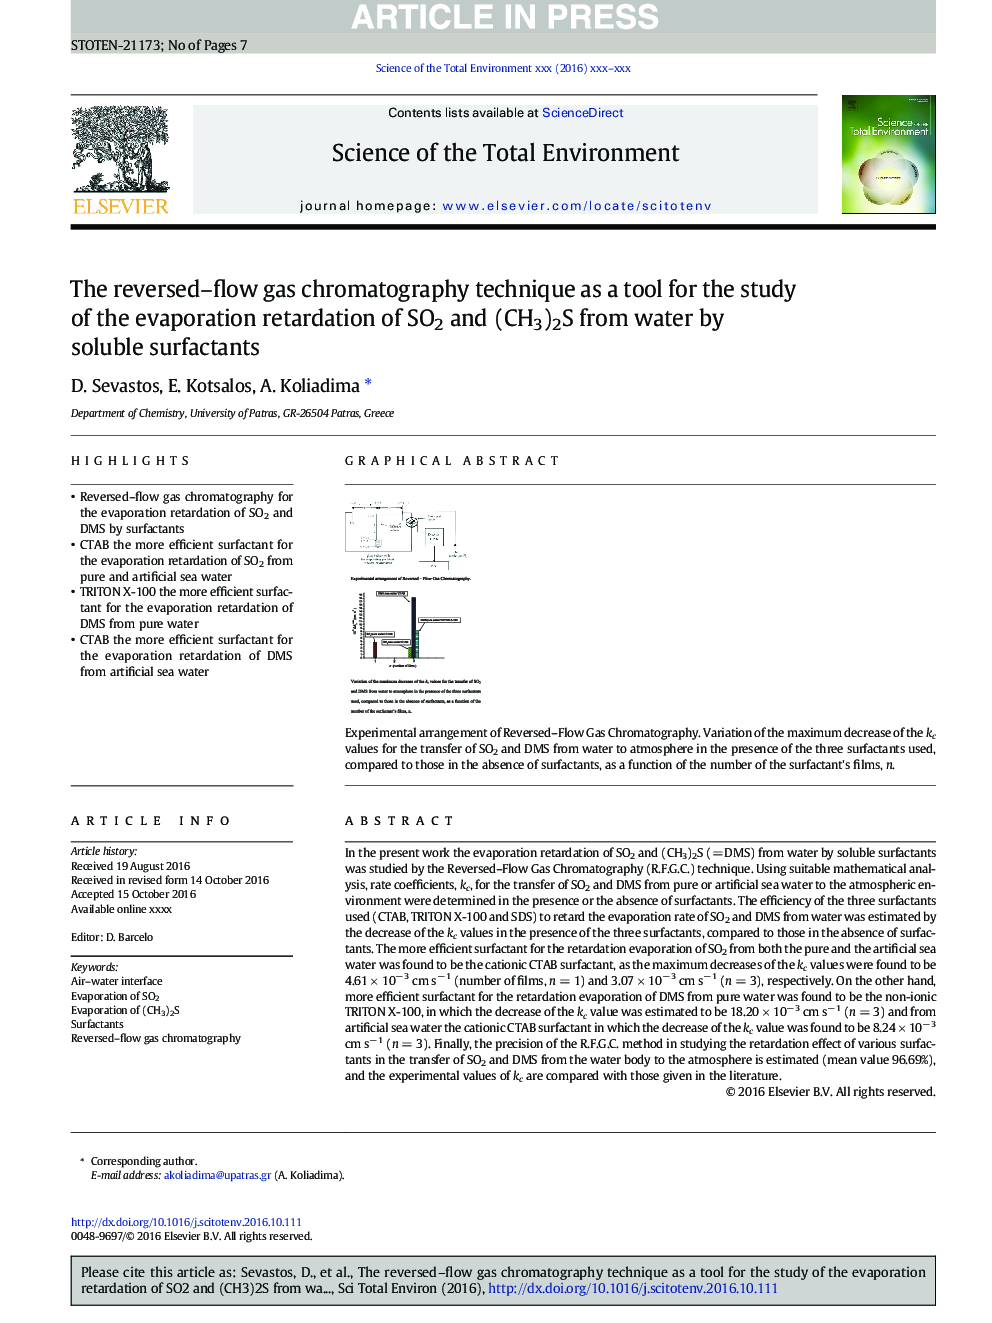 The reversed-flow gas chromatography technique as a tool for the study of the evaporation retardation of SO2 and (CH3)2S from water by soluble surfactants